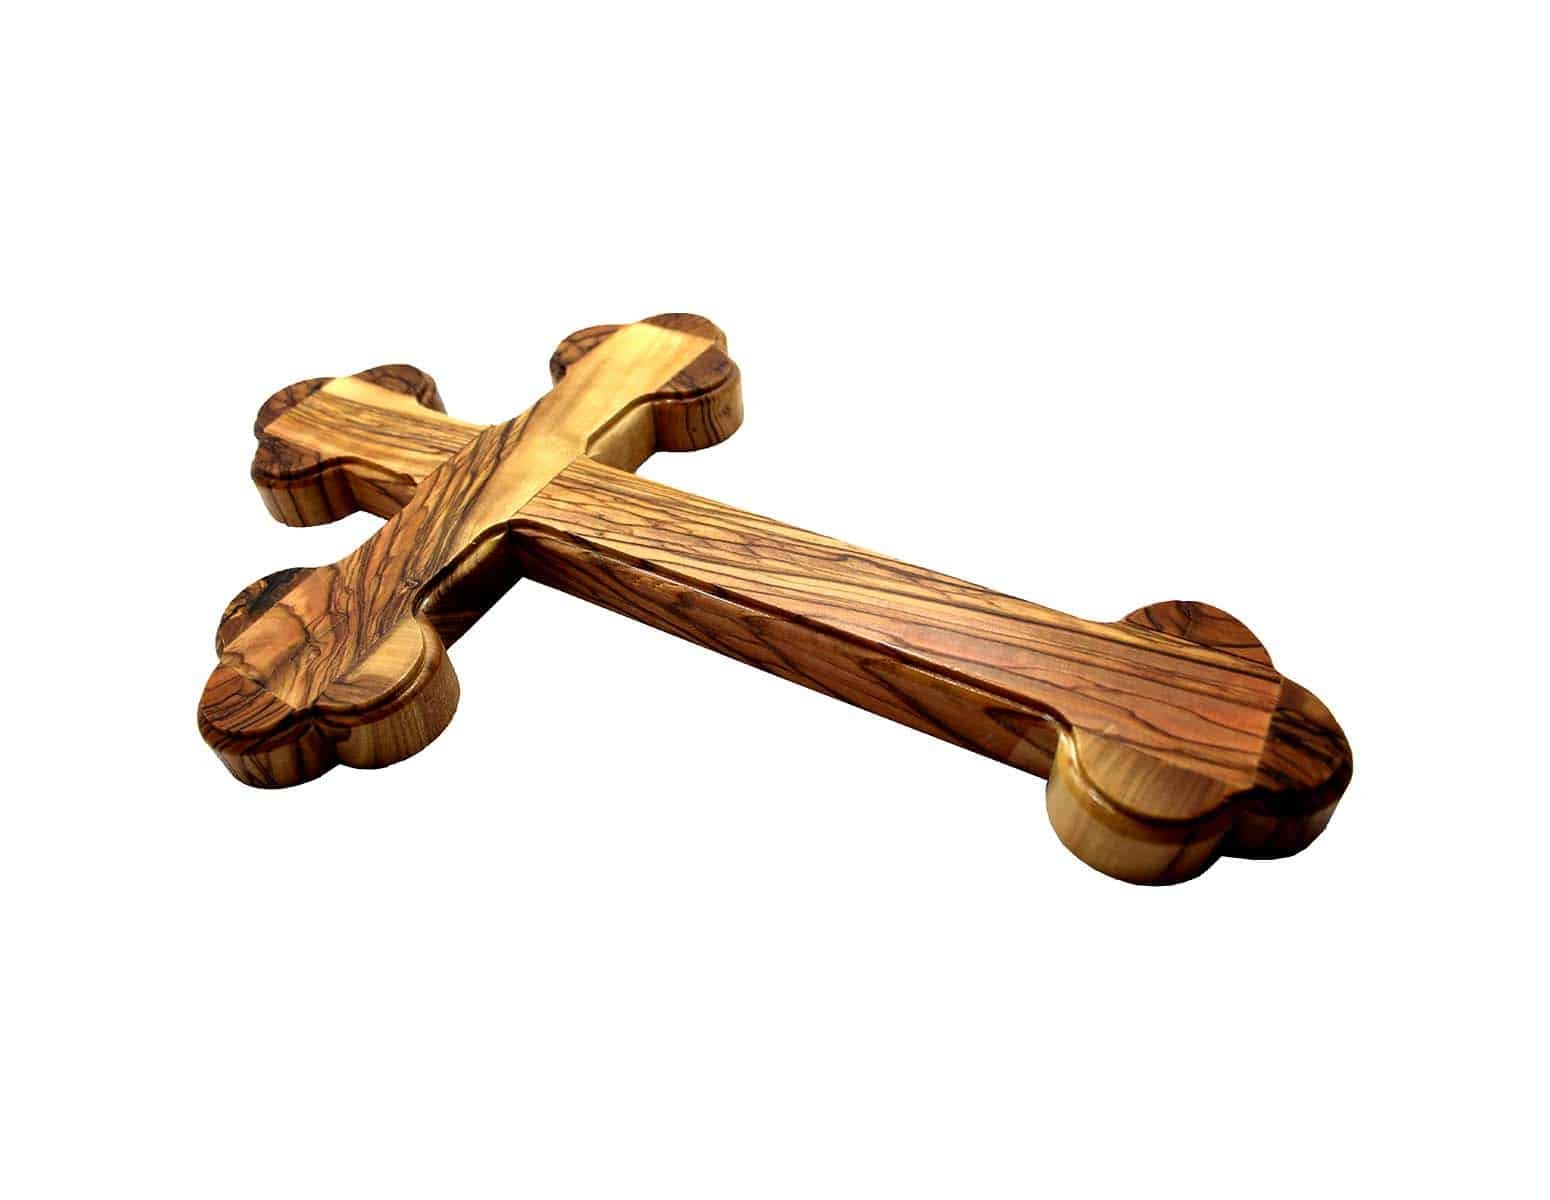 Details about   Orthodox Hand Painted Wooden Crucifix Cross For Holy Table Orthodoxes Kruzifix 